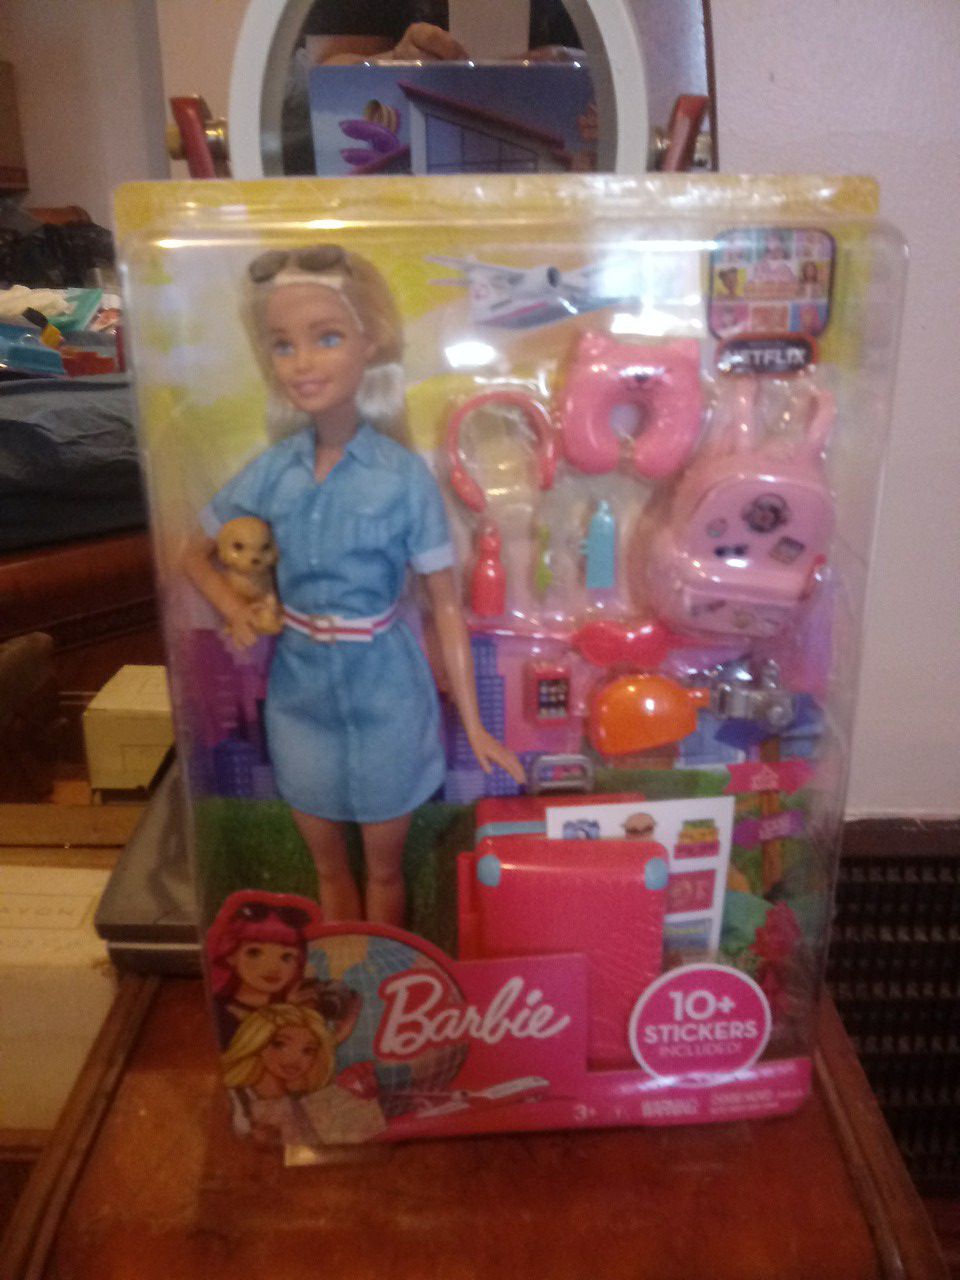 Brand new Barbie accessories and doll